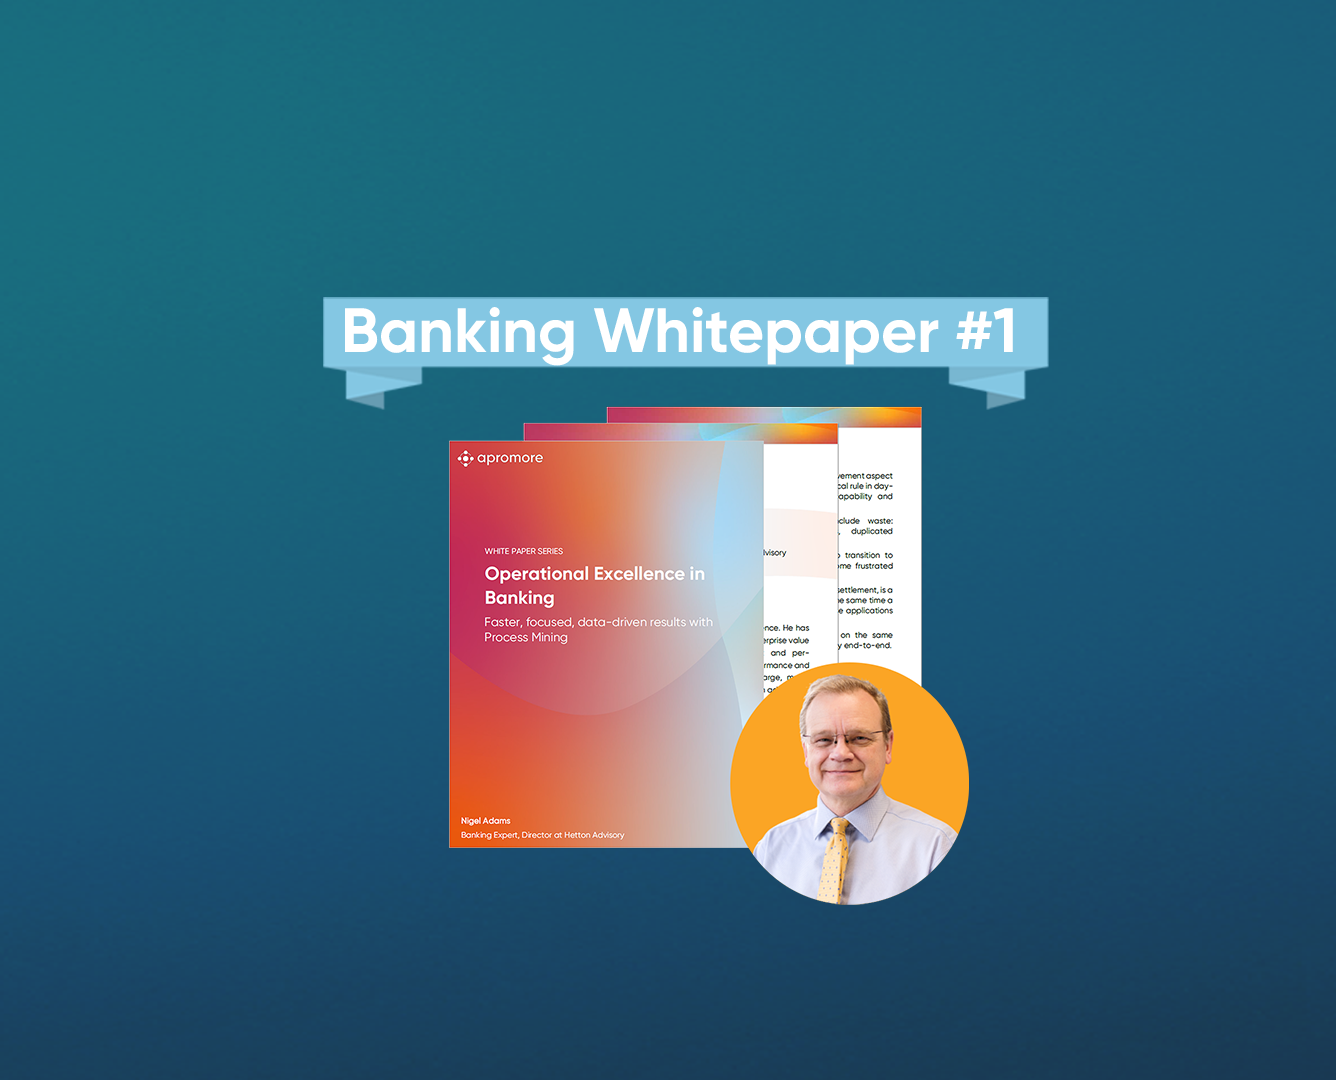 Whitepaper: Operational Excellence in Banking (with Nigel Adams)